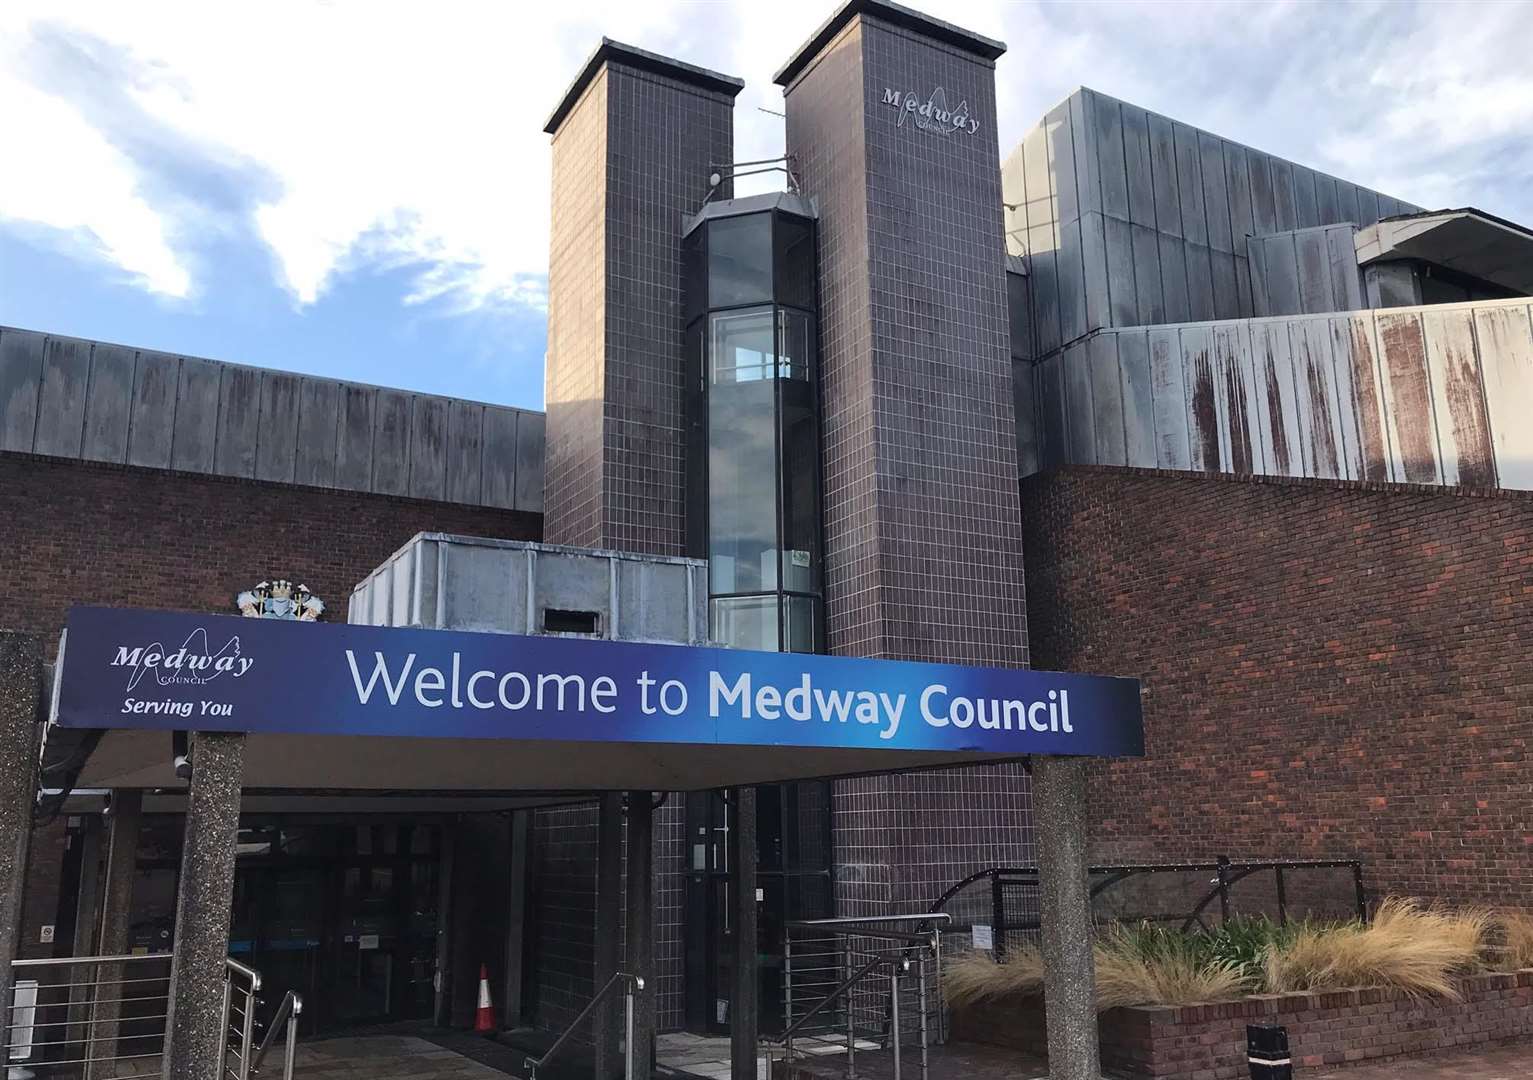 Medway Council is having to make budget cuts